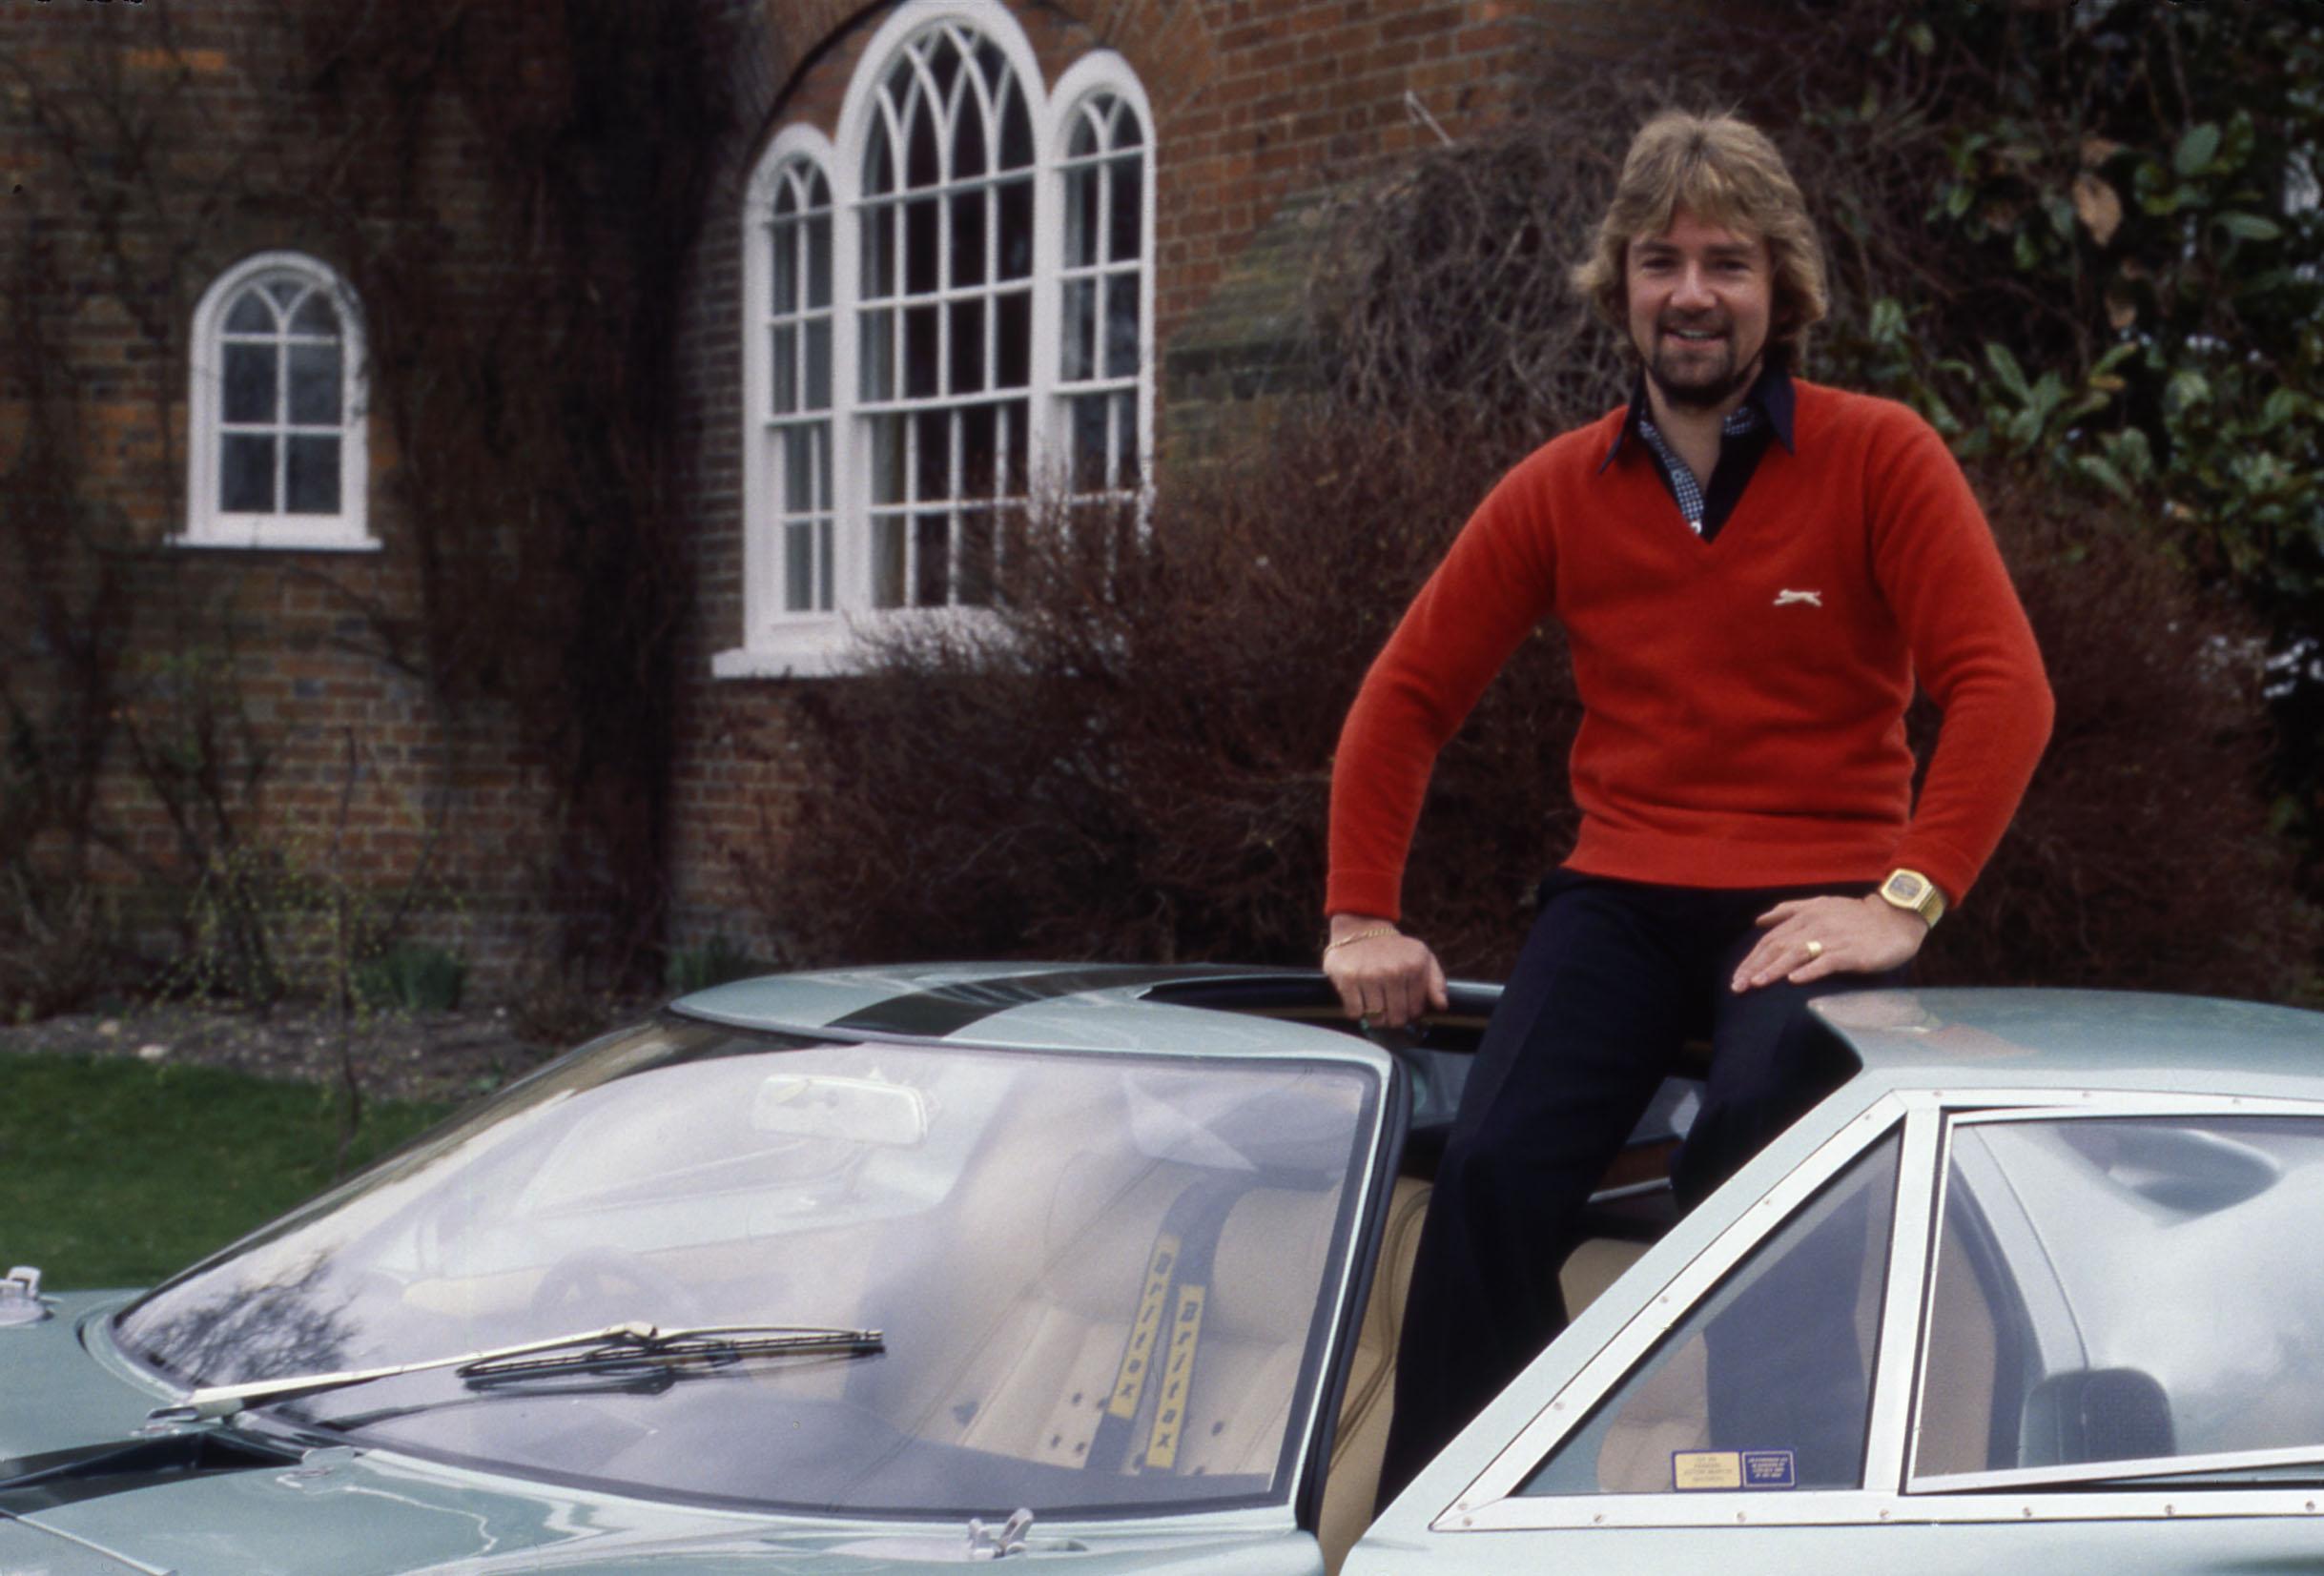 midnat forvisning Streng BBC Newsbeat no Twitter: "Jeremy Clarkson joined Top Gear in 1988. See some  of the other stars who've been on the show. http://t.co/uZjcS0y2W1  http://t.co/7W4LBVYdrk" / Twitter